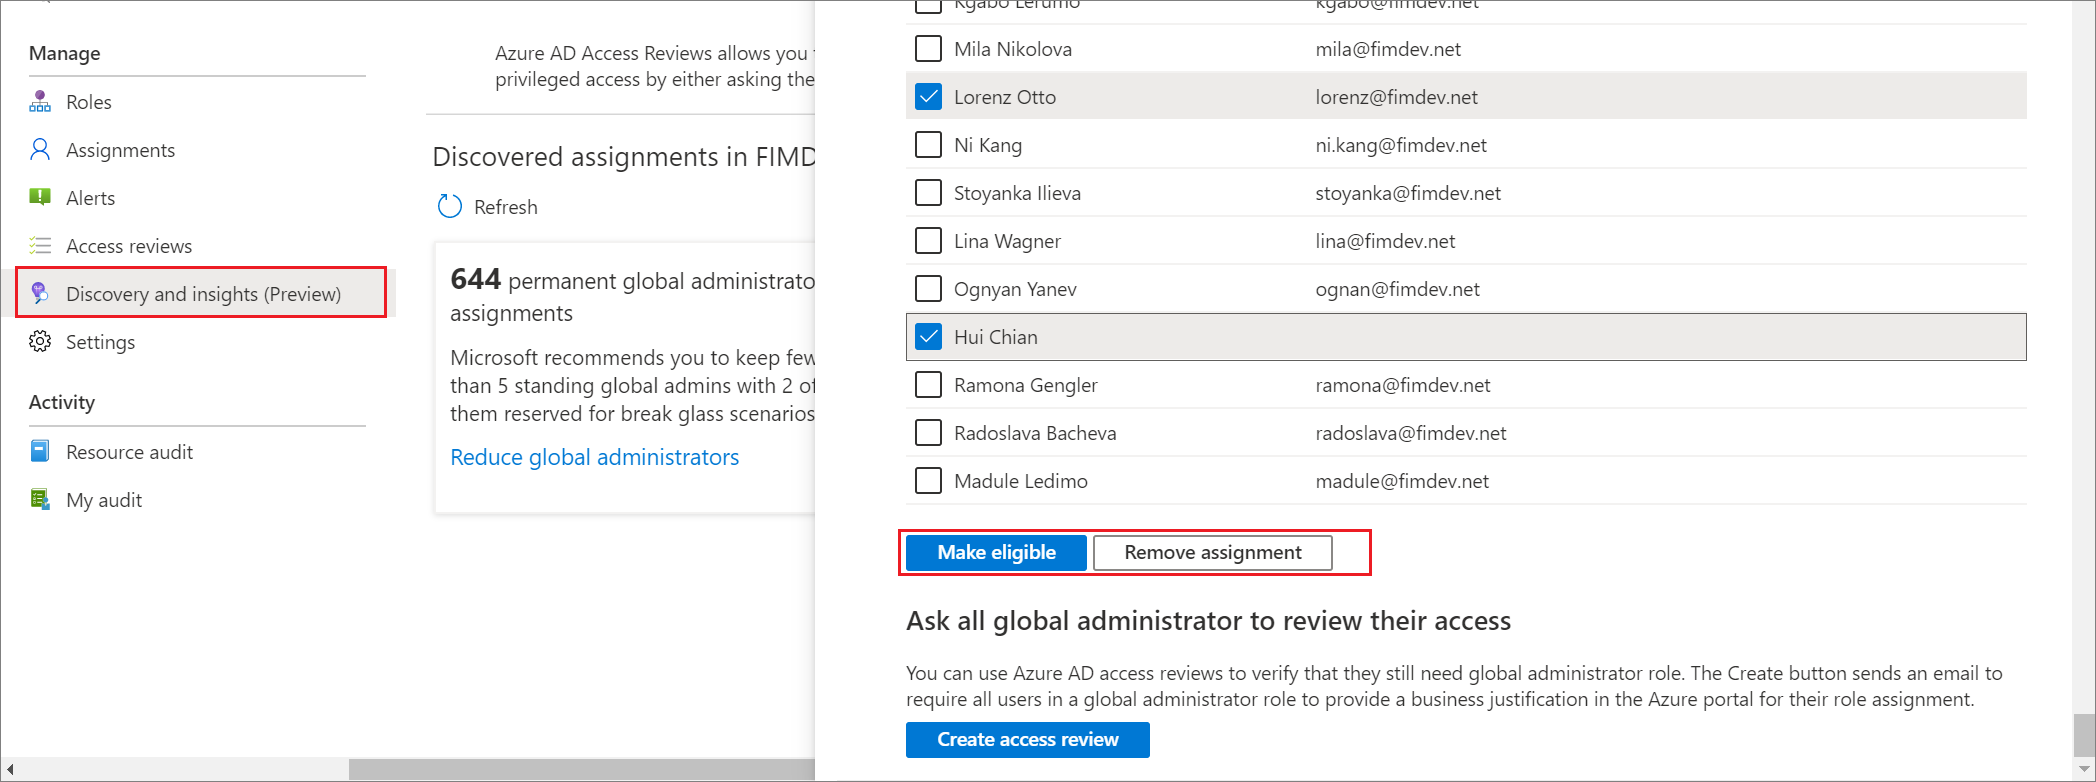 Screenshot showing how to convert members to eligible page with options to select members you want to make eligible for roles.